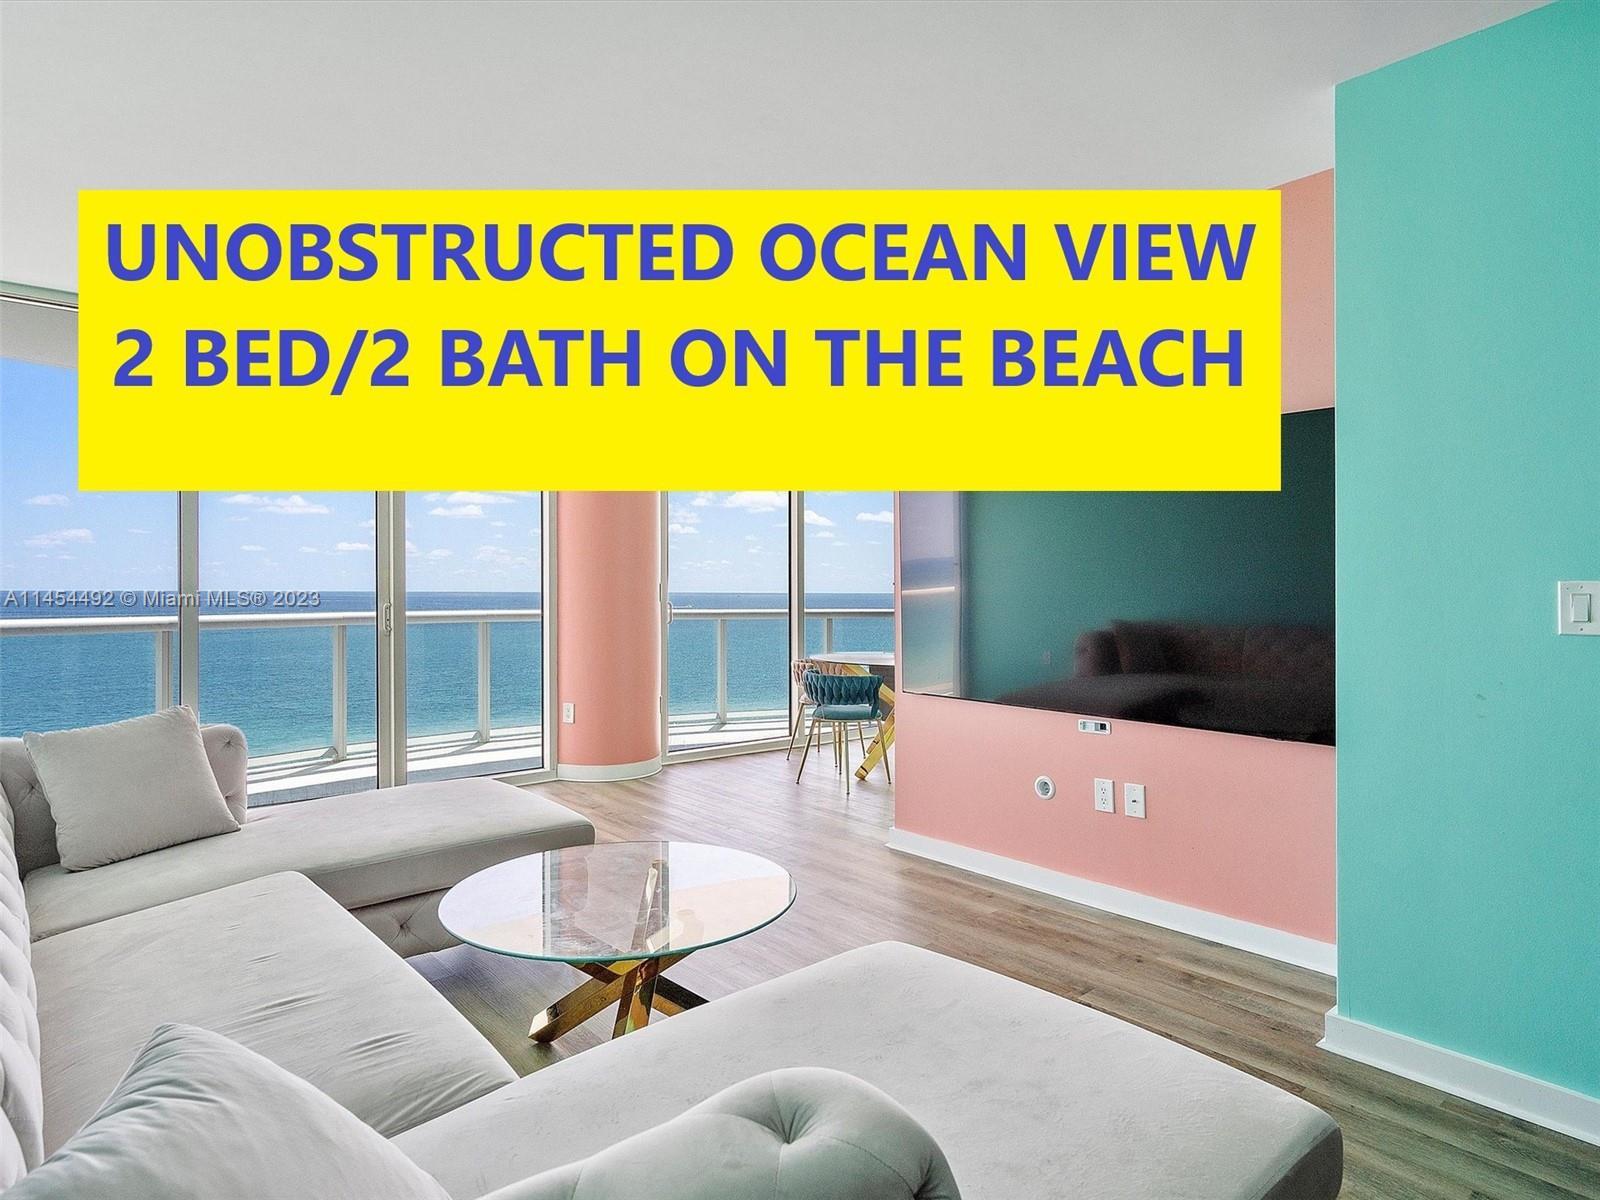 OCEANFRONT! Unobstructed Views! Enjoy the stunning Sunrise & Sunsets from your spacious balcony & st